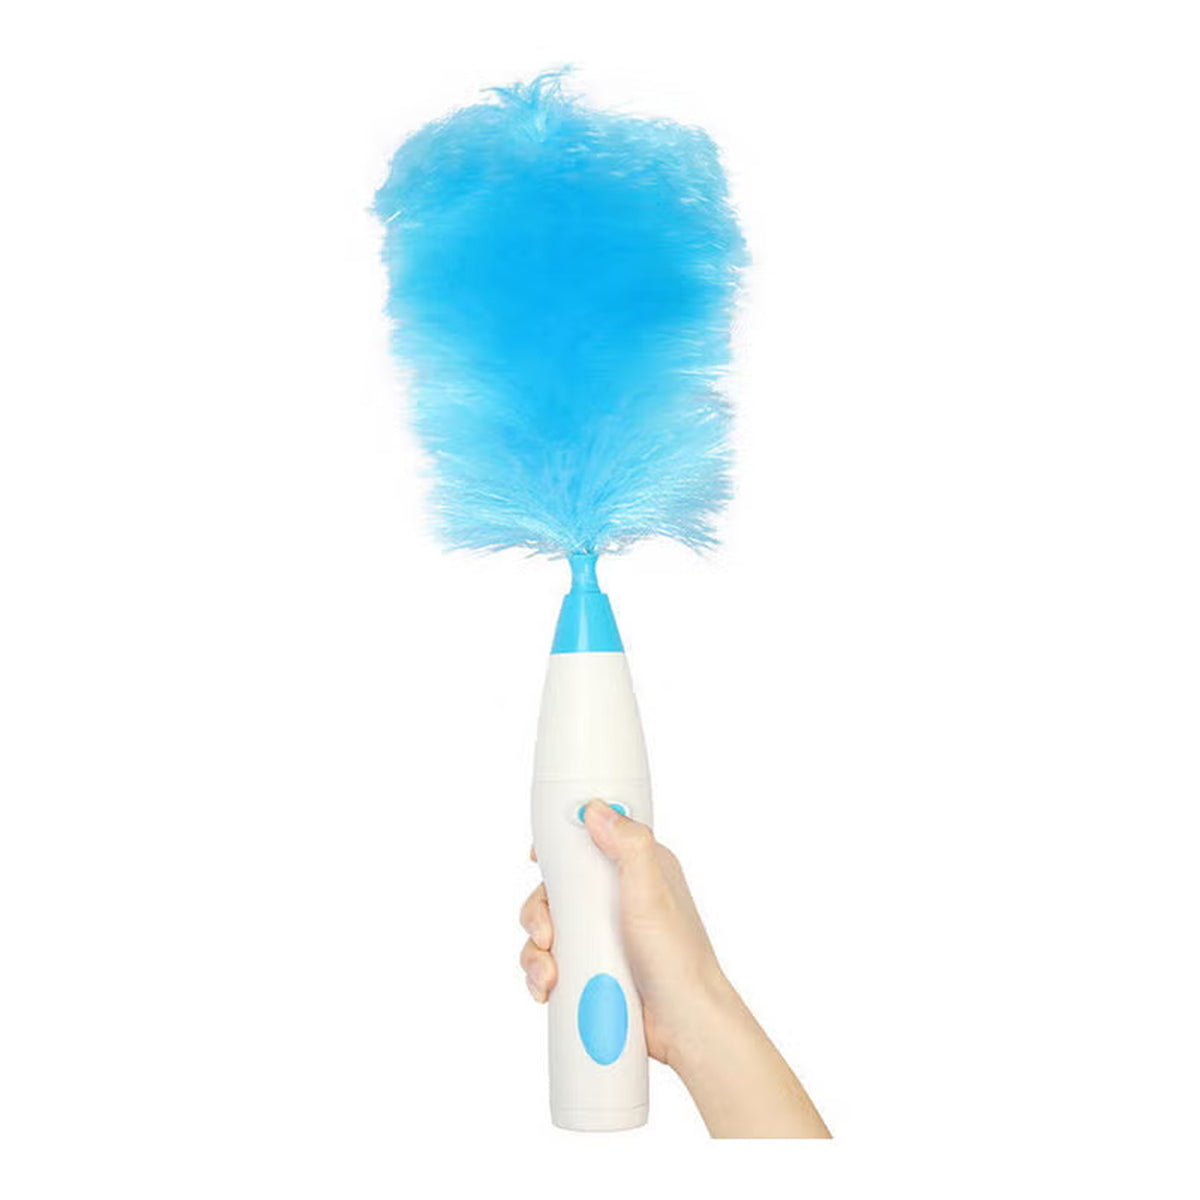 Handheld Electric Spin Duster